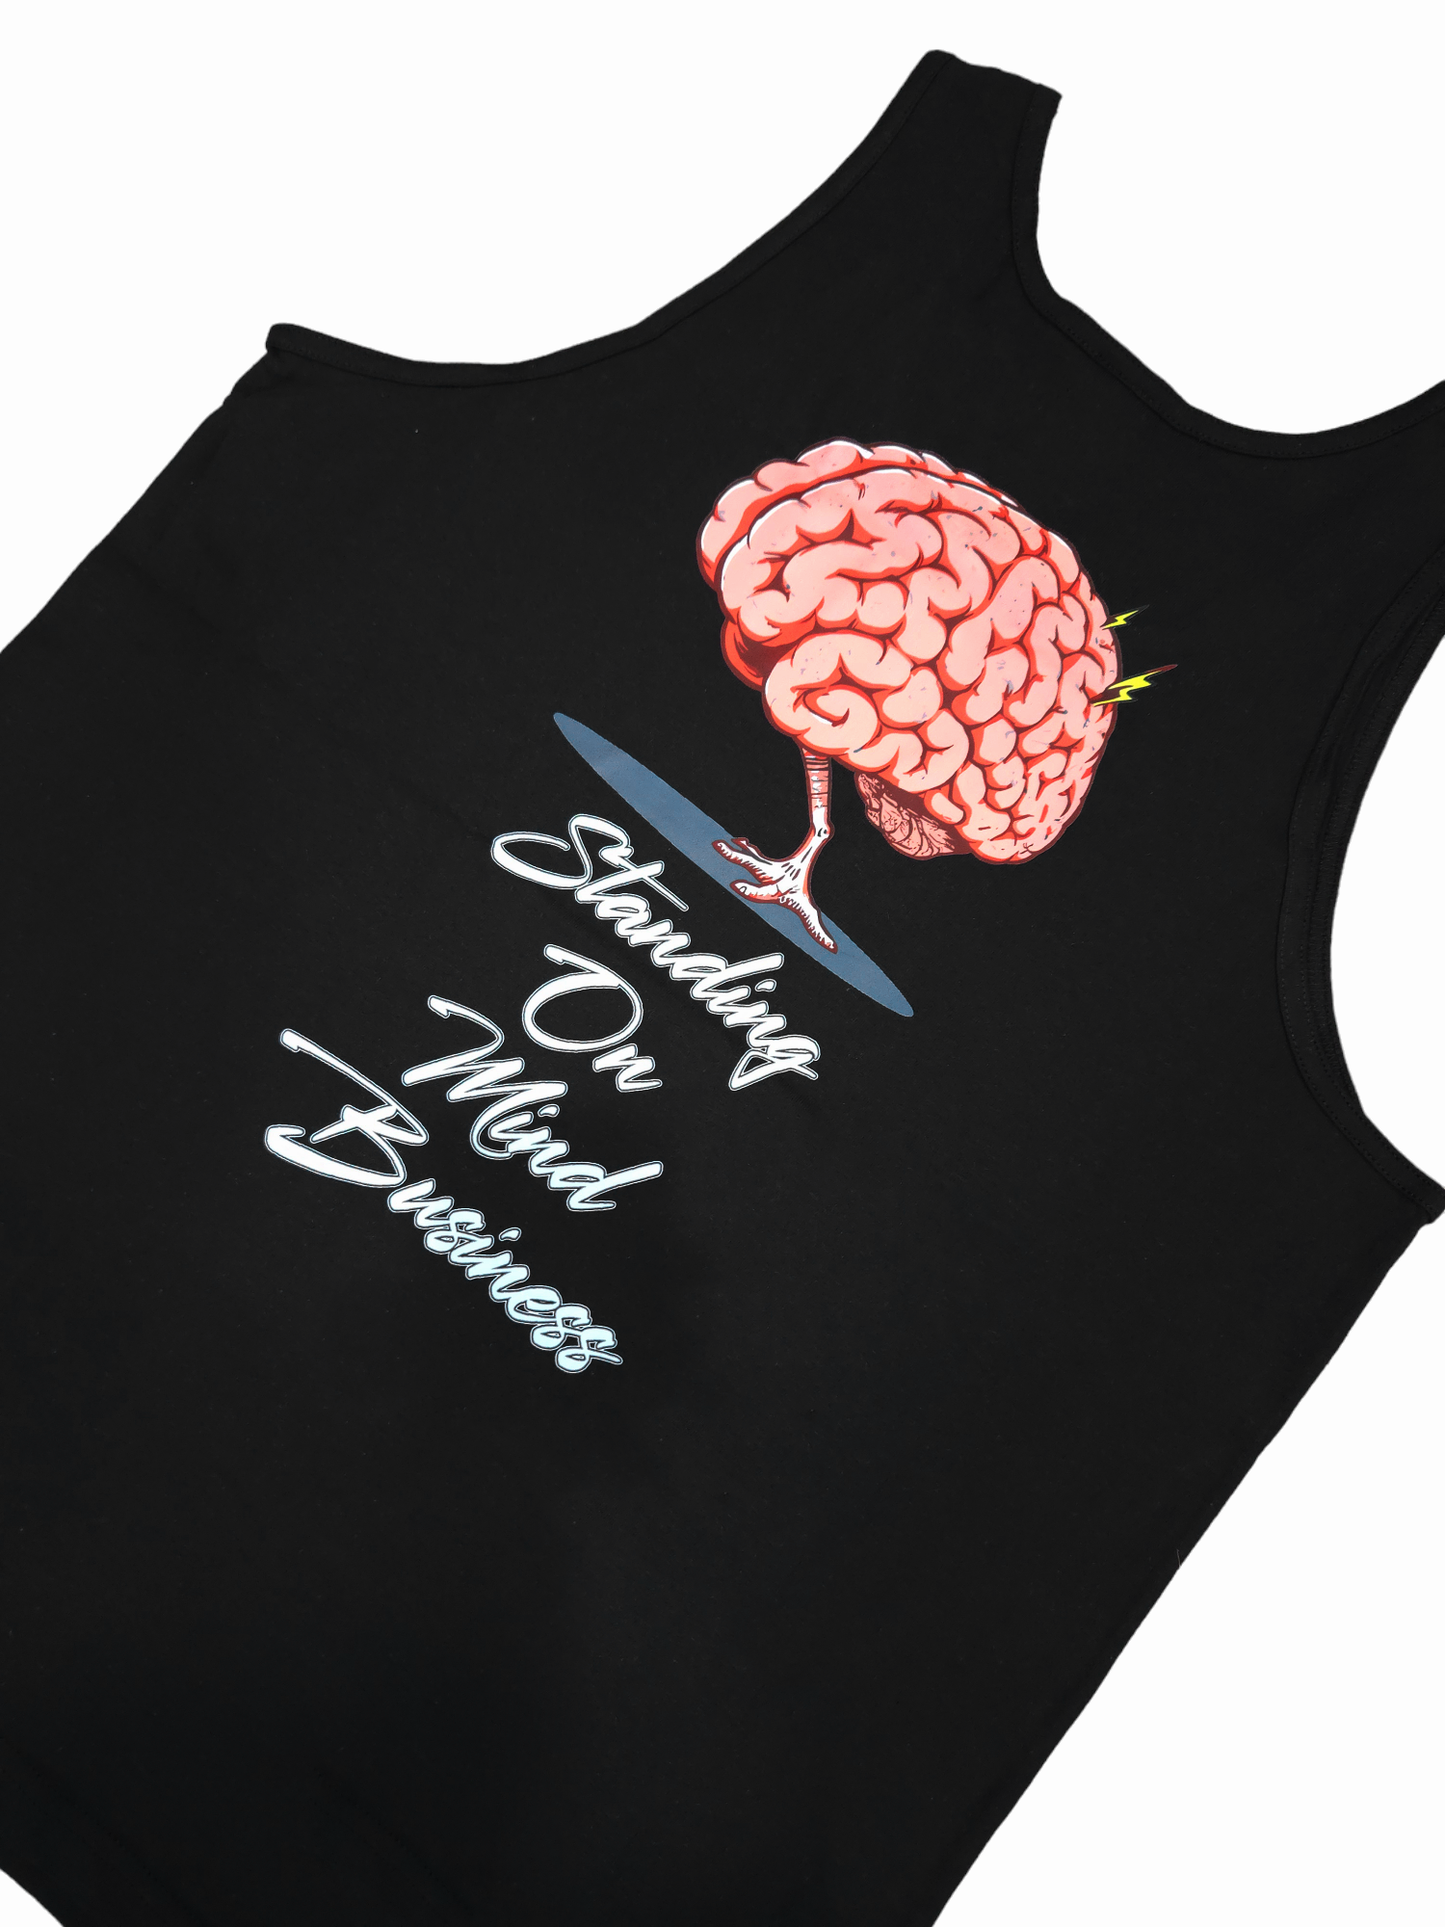 Stained Men's - S.O.M.B Tank Top